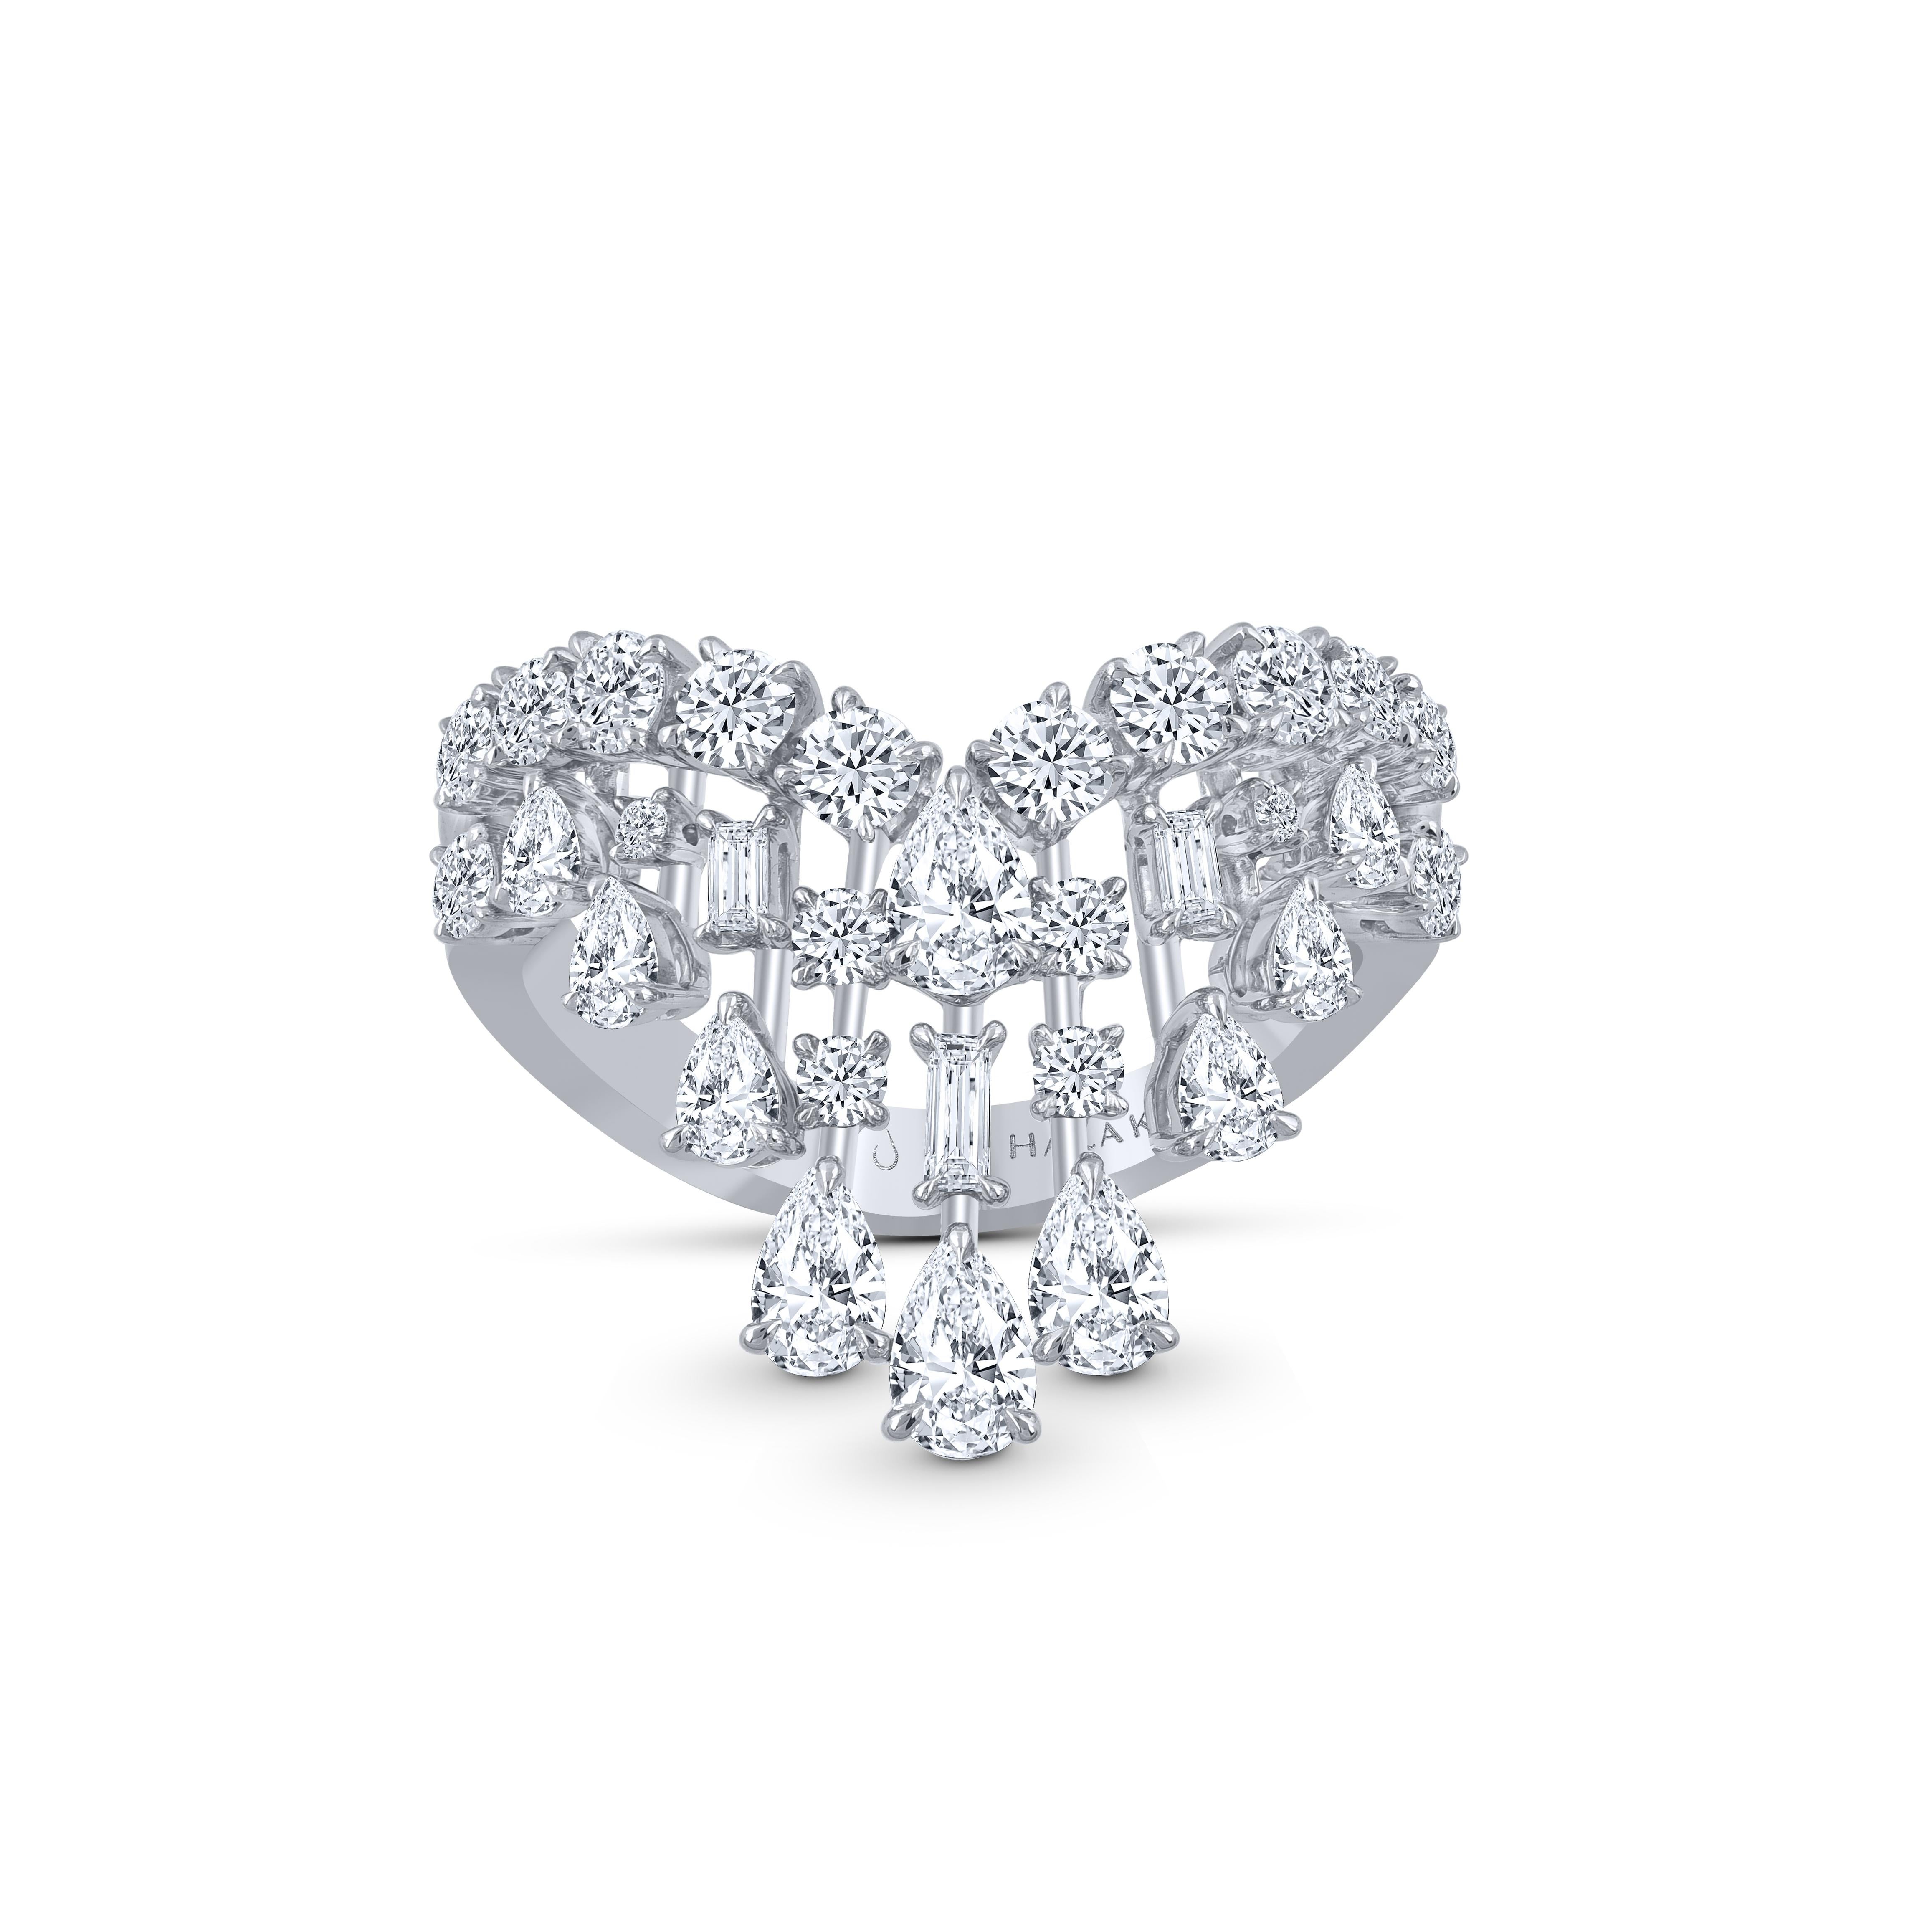 Harakh Colorless Diamond 1.65 Carat Cluster Ring in 18 Kt White Gold In New Condition For Sale In New York, NY